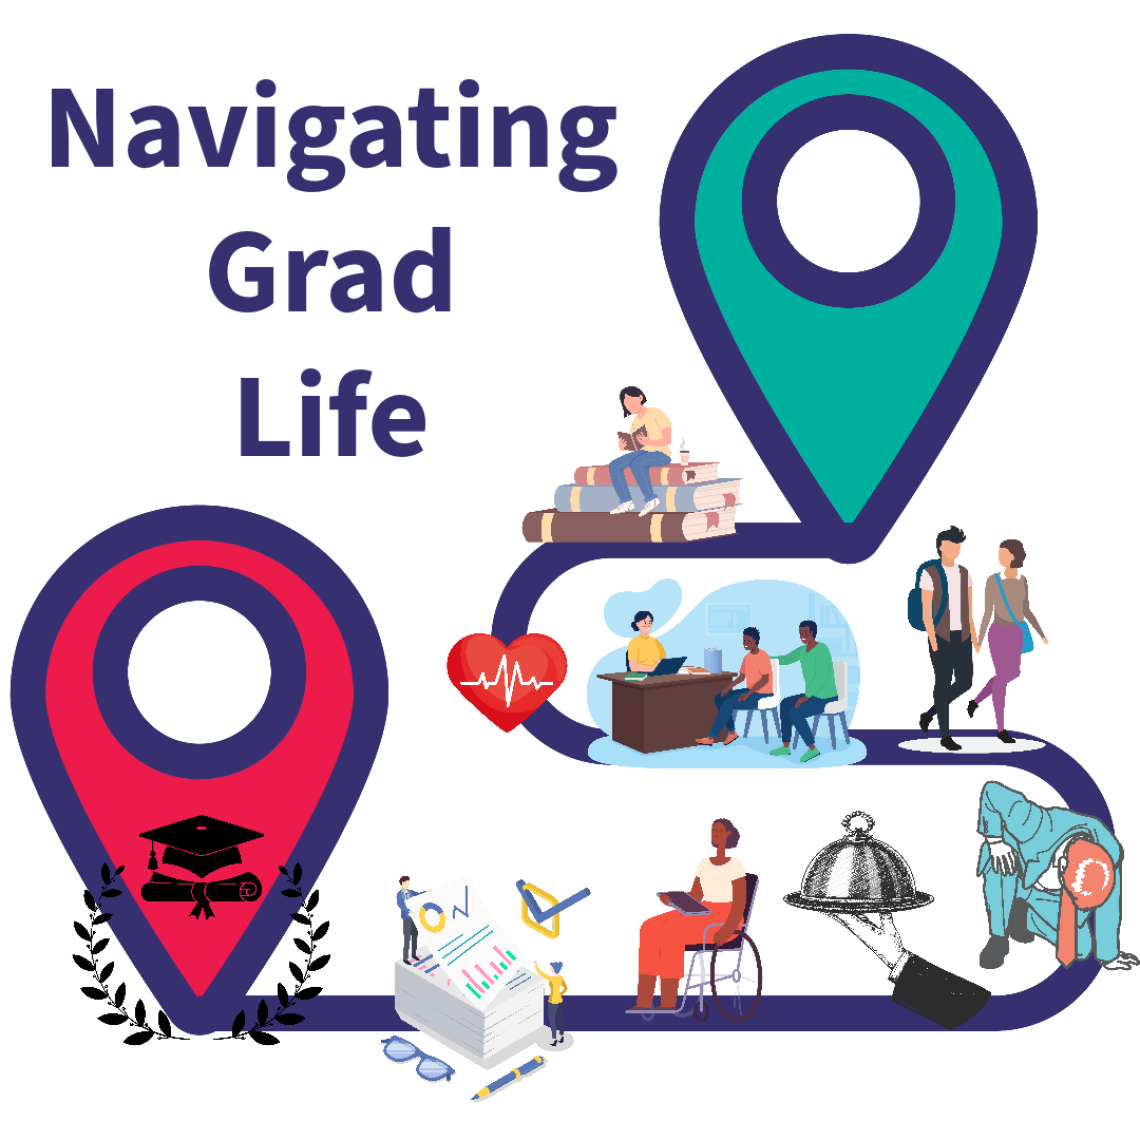 A diagram showing activities associated with graduate student life: reading, working with others, exercising, overcoming challenges, completing projects, and graduation.